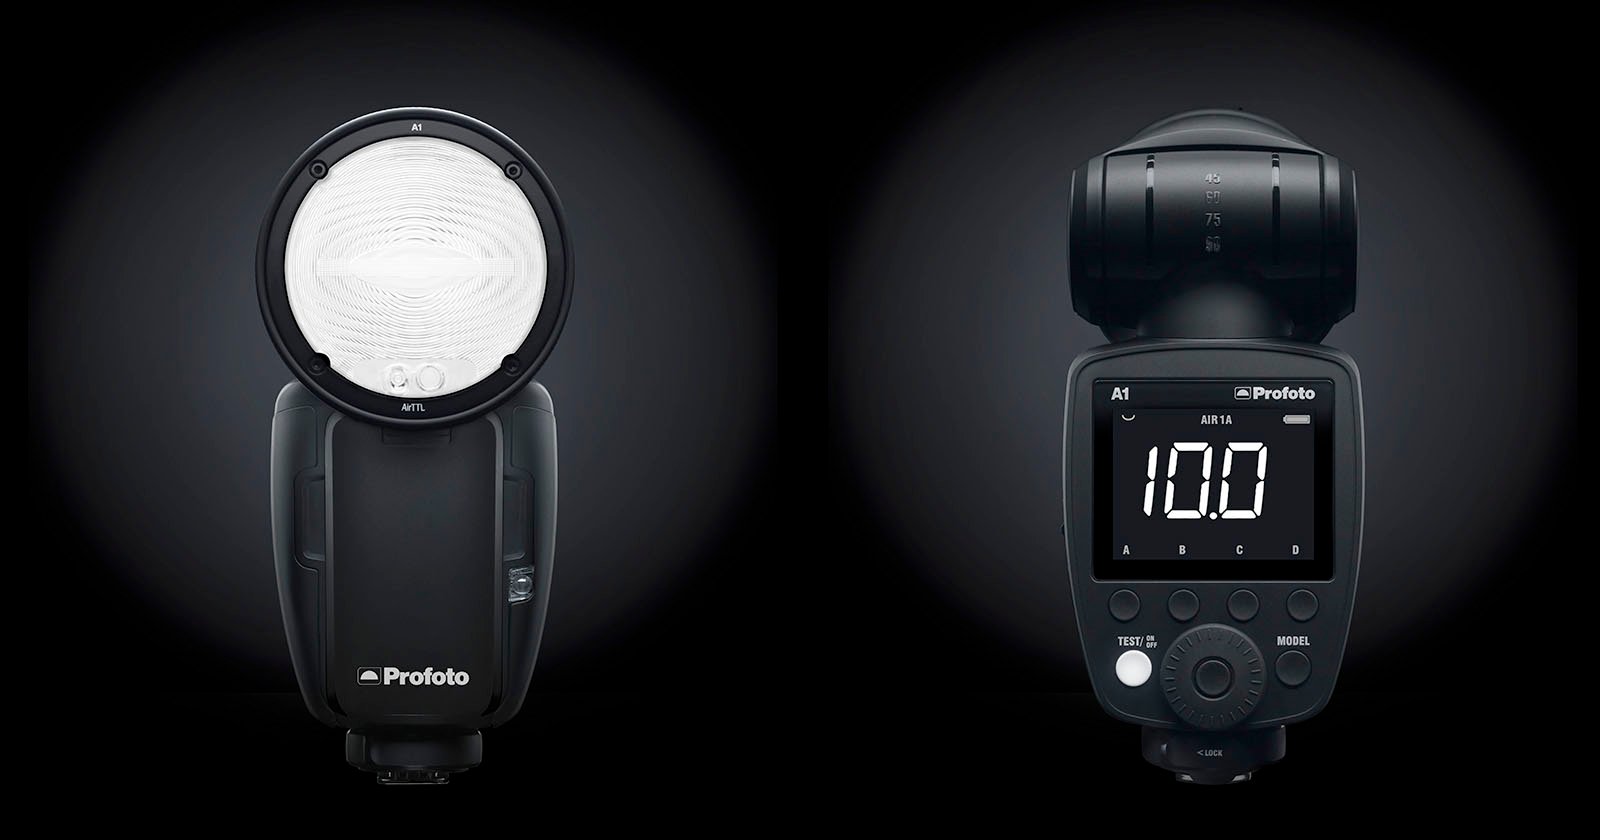 Review: The Profoto A1 is a Simple and Naturally Beautiful Flash